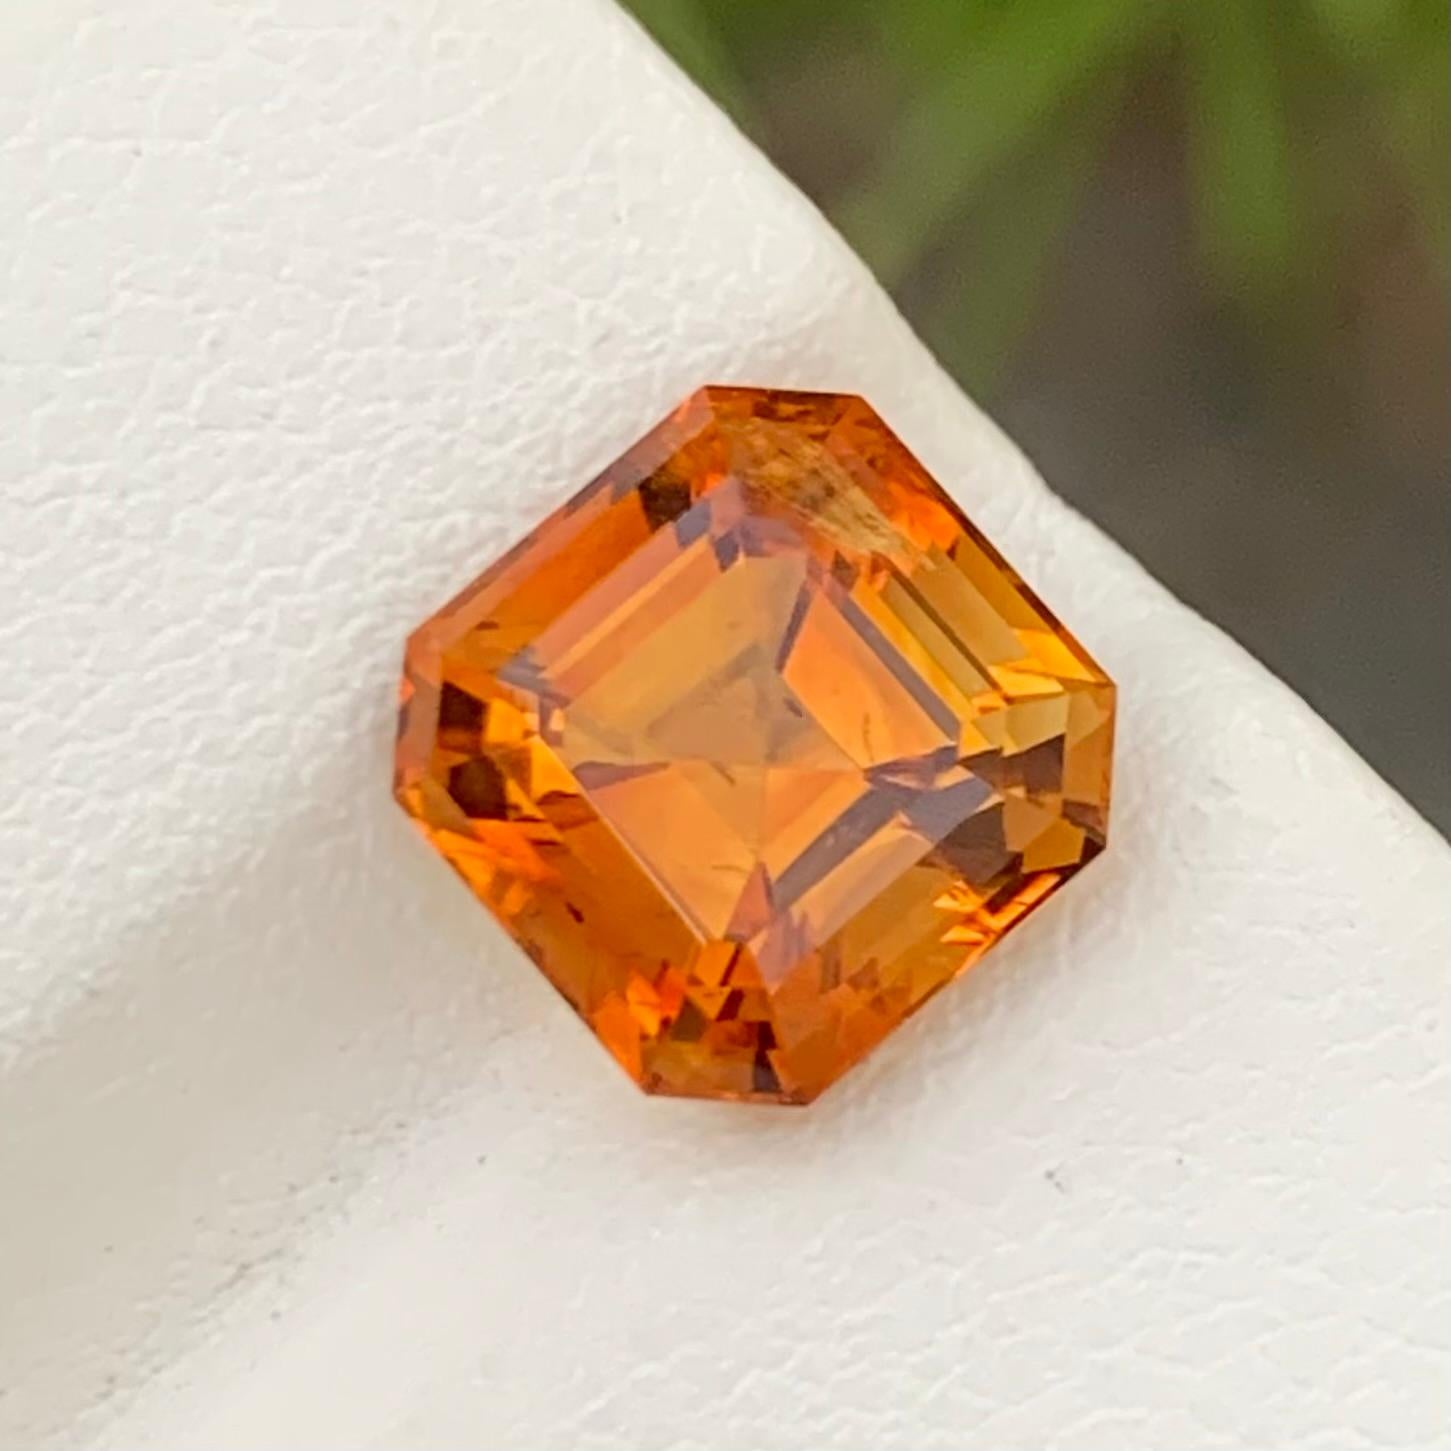 Loose Madeira Citrine
Weight: 3.60 Carats
Dimension: 8.9 x 8.9 x 7.1 Mm
Origin: Brazil
Colour : Orange and Yellow
Shape: Square
Cut: Asscher 
Certificate: On Demand

Madeira Citrine, a captivating gemstone named after the rich and warm tones